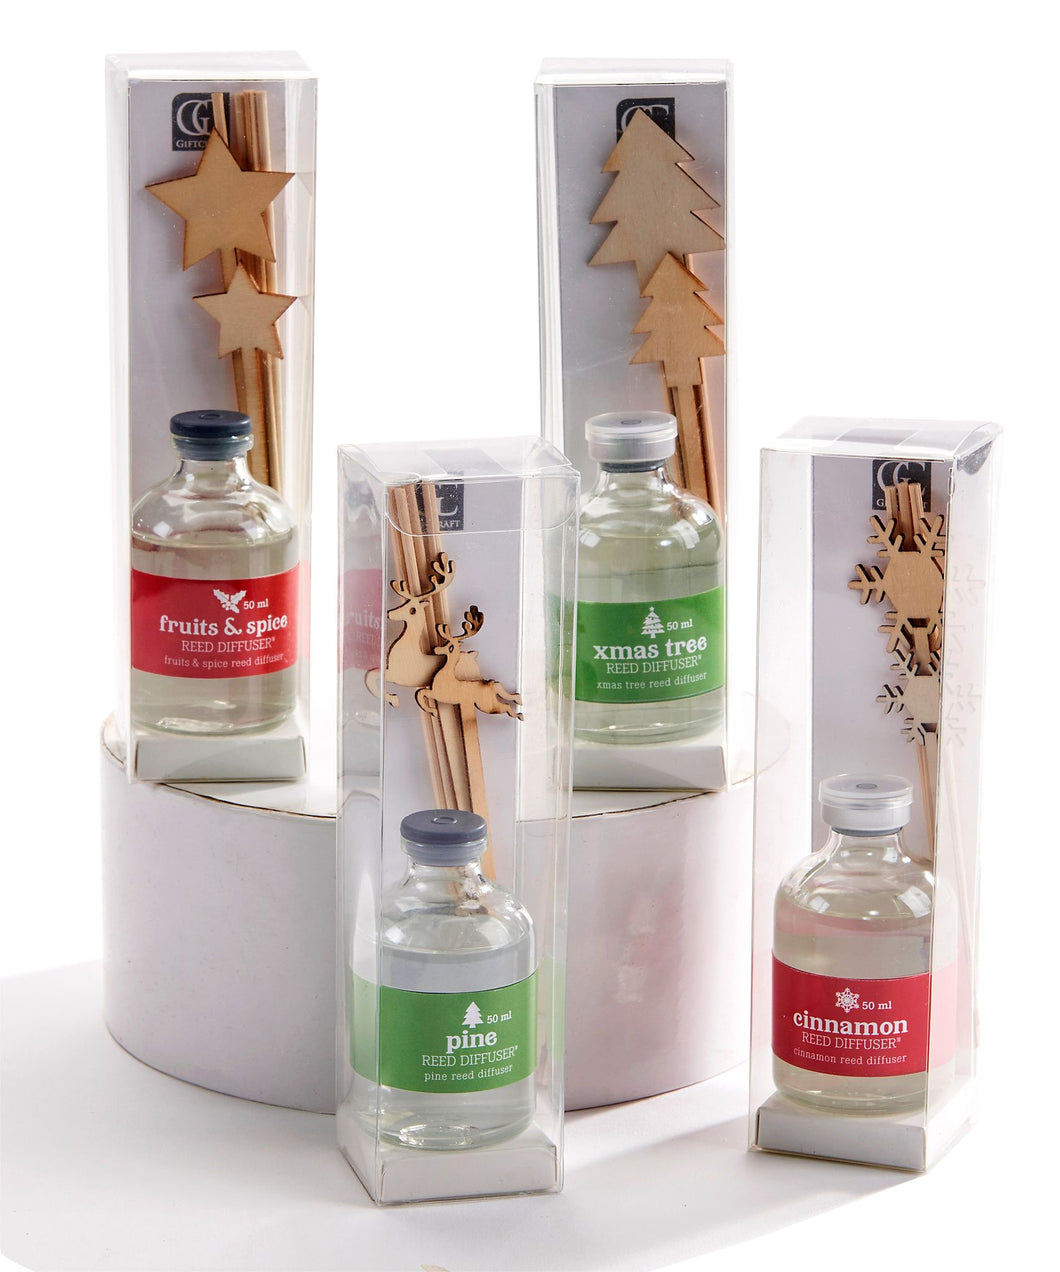 Fruit and spice reed diffuser snowflake reed